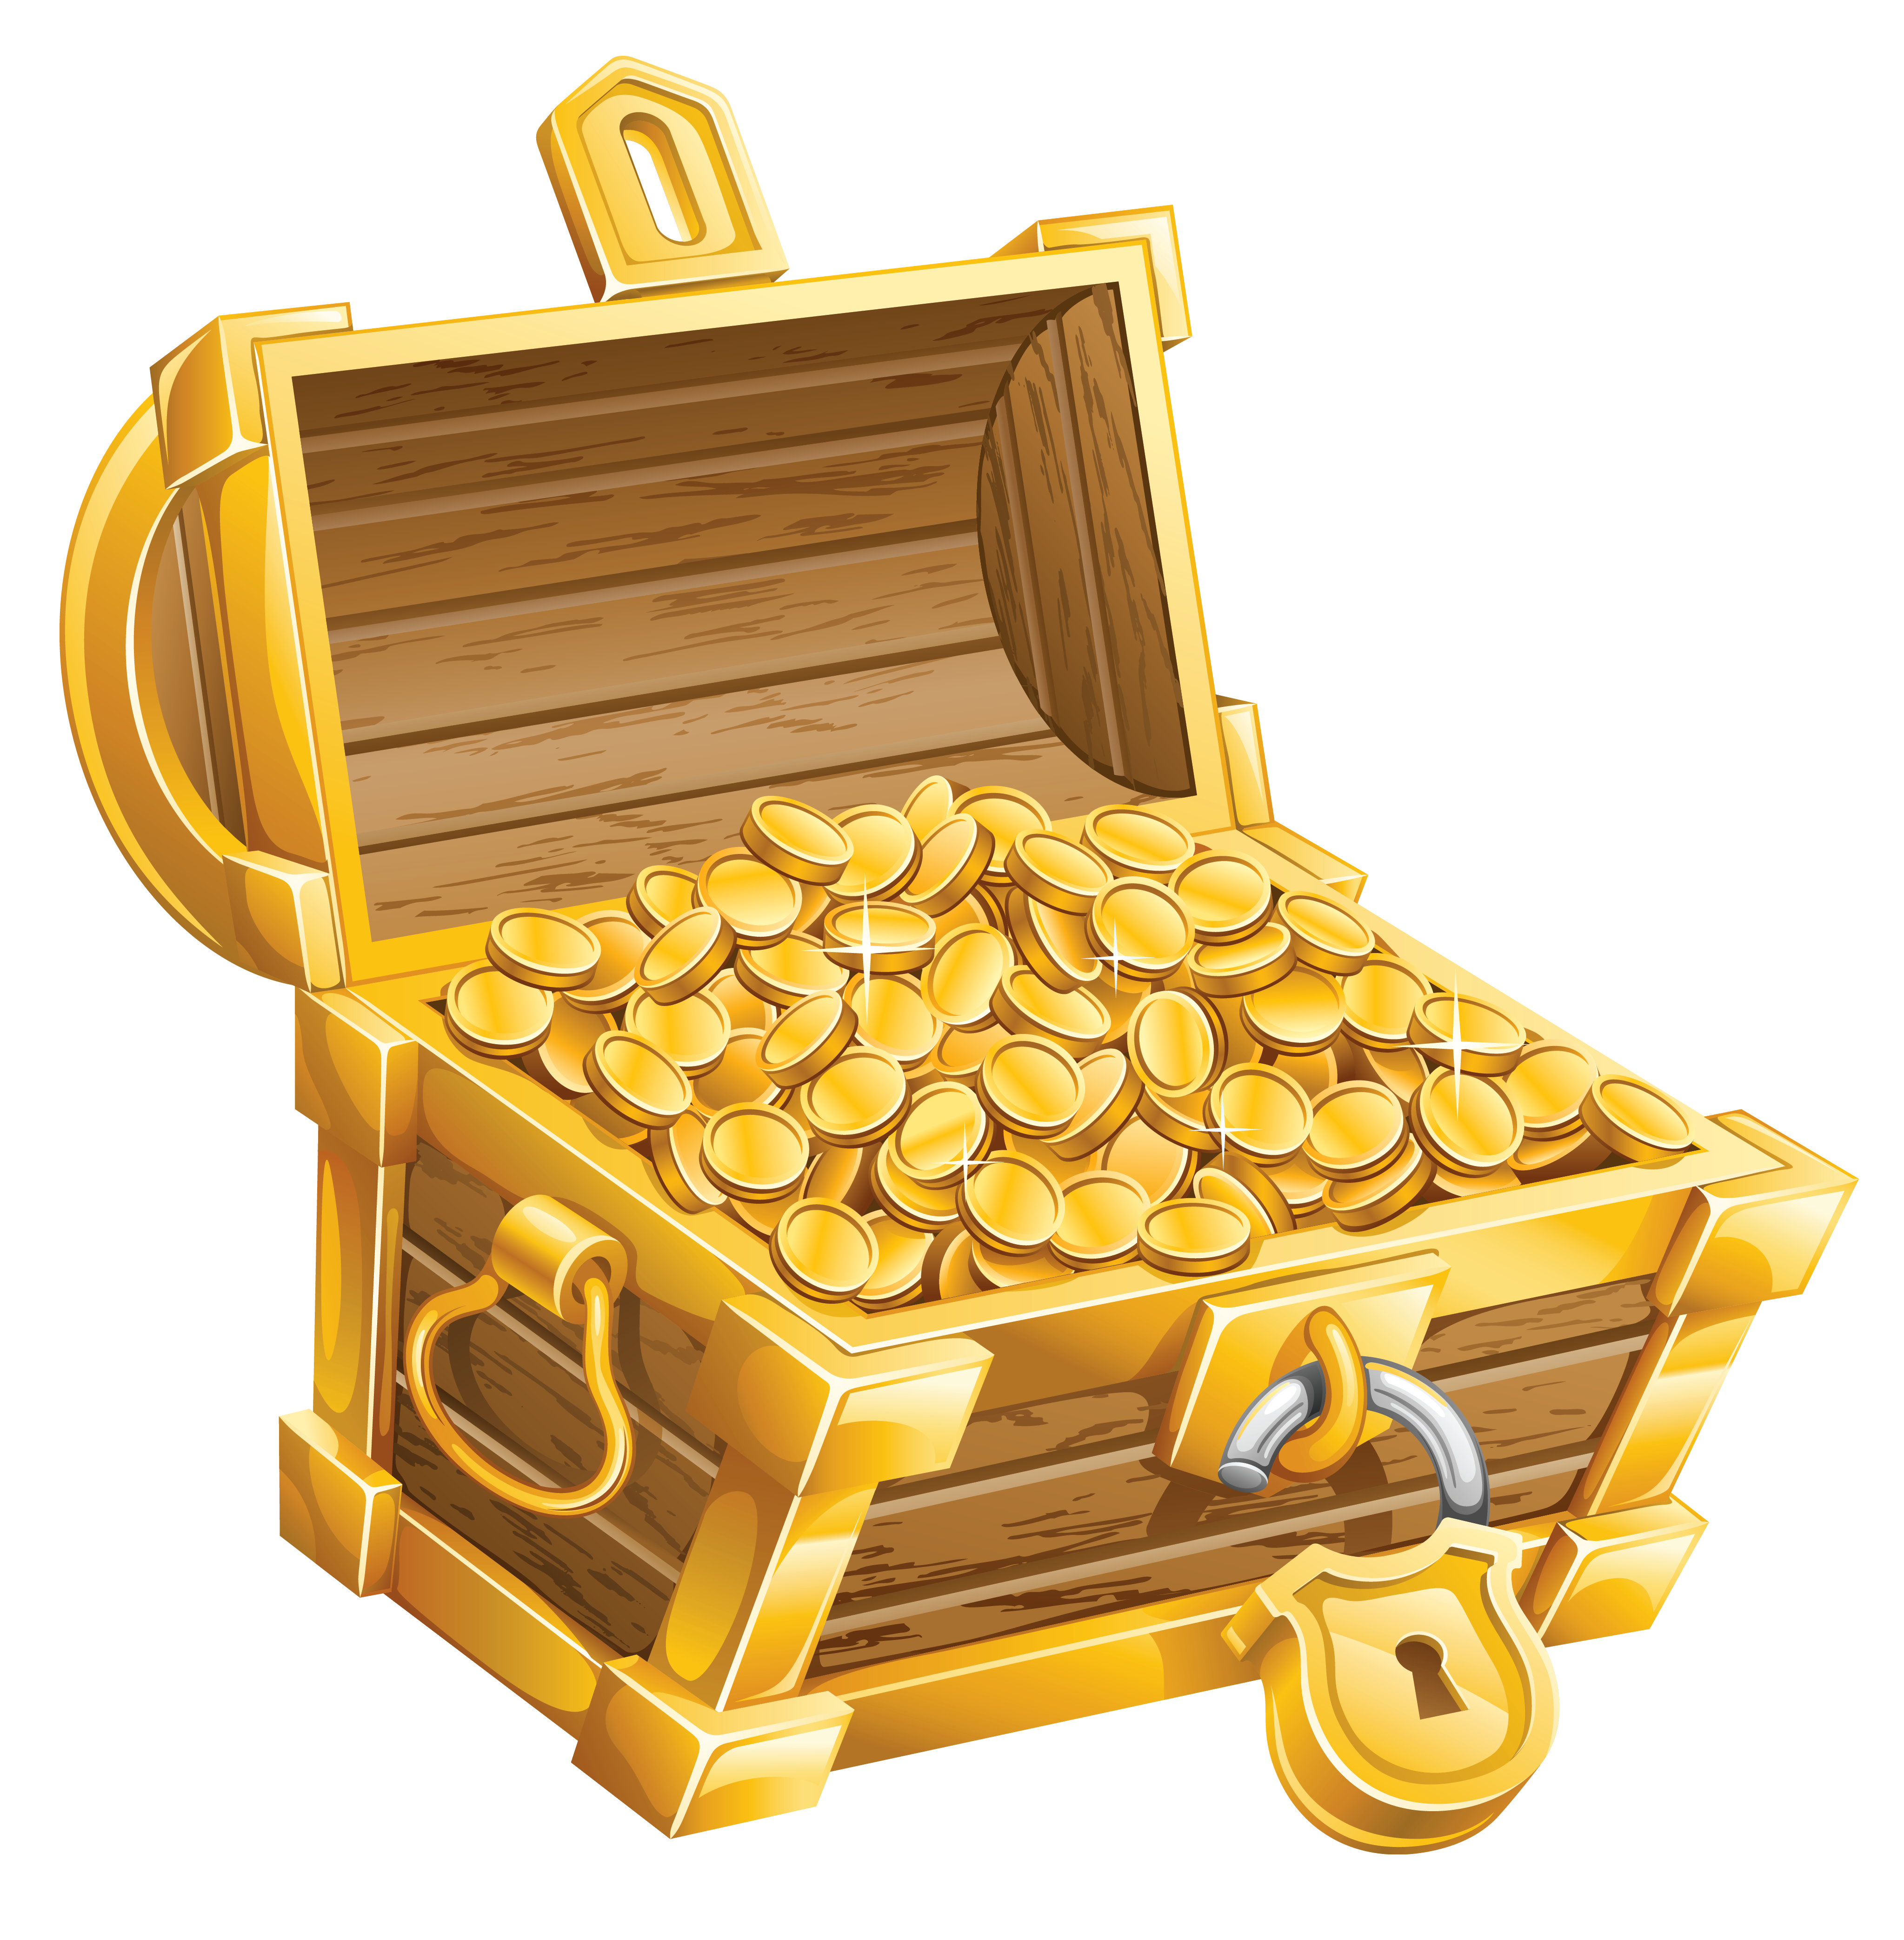 Free Treasure Chest Png, Download Free Clip Art, Free Clip.